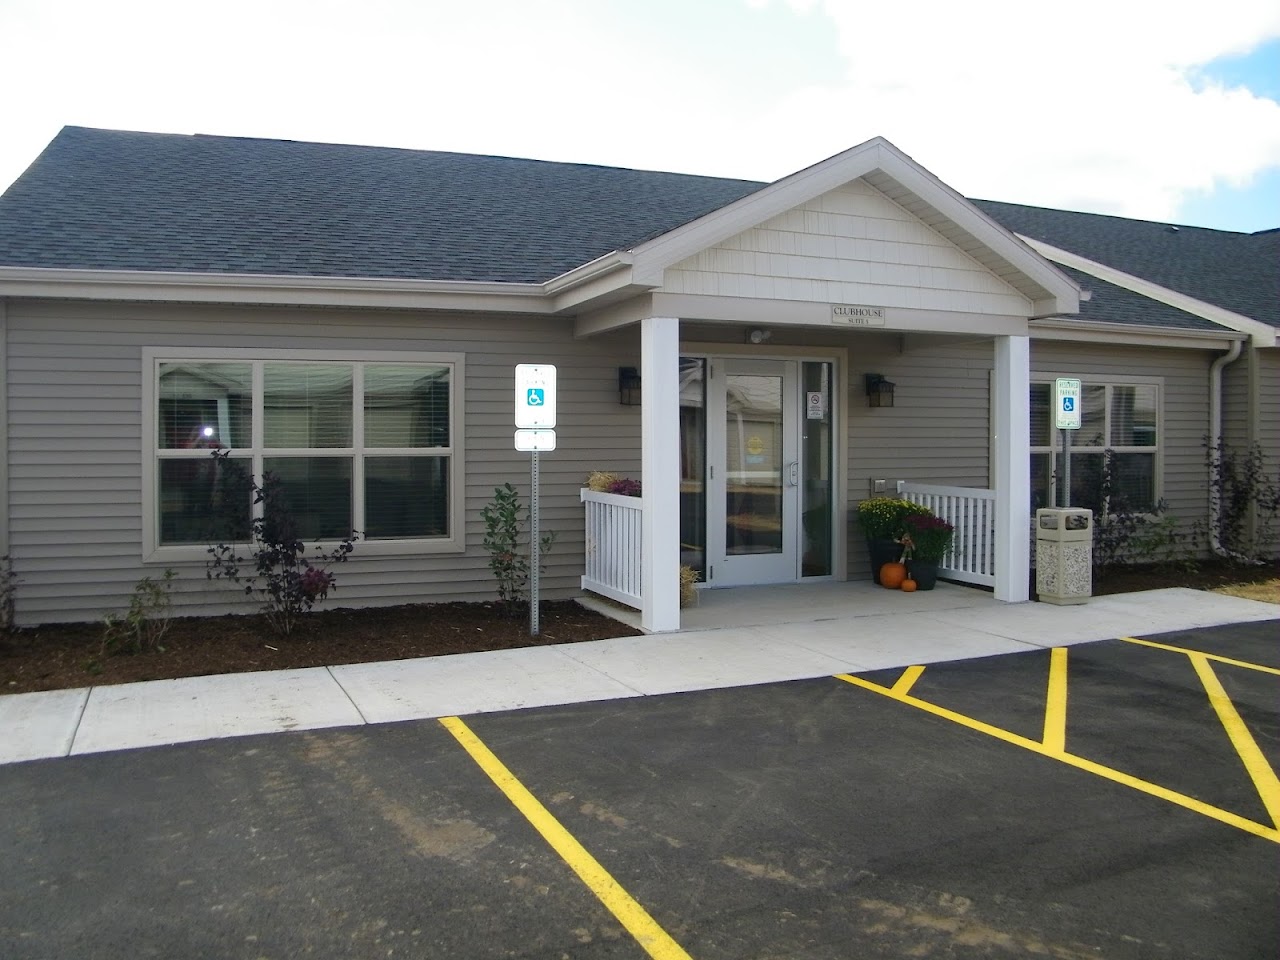 Photo of MISSION VILLAGE OF DODGEVILLE. Affordable housing located at 206 COLIN DR DODGEVILLE, WI 53533